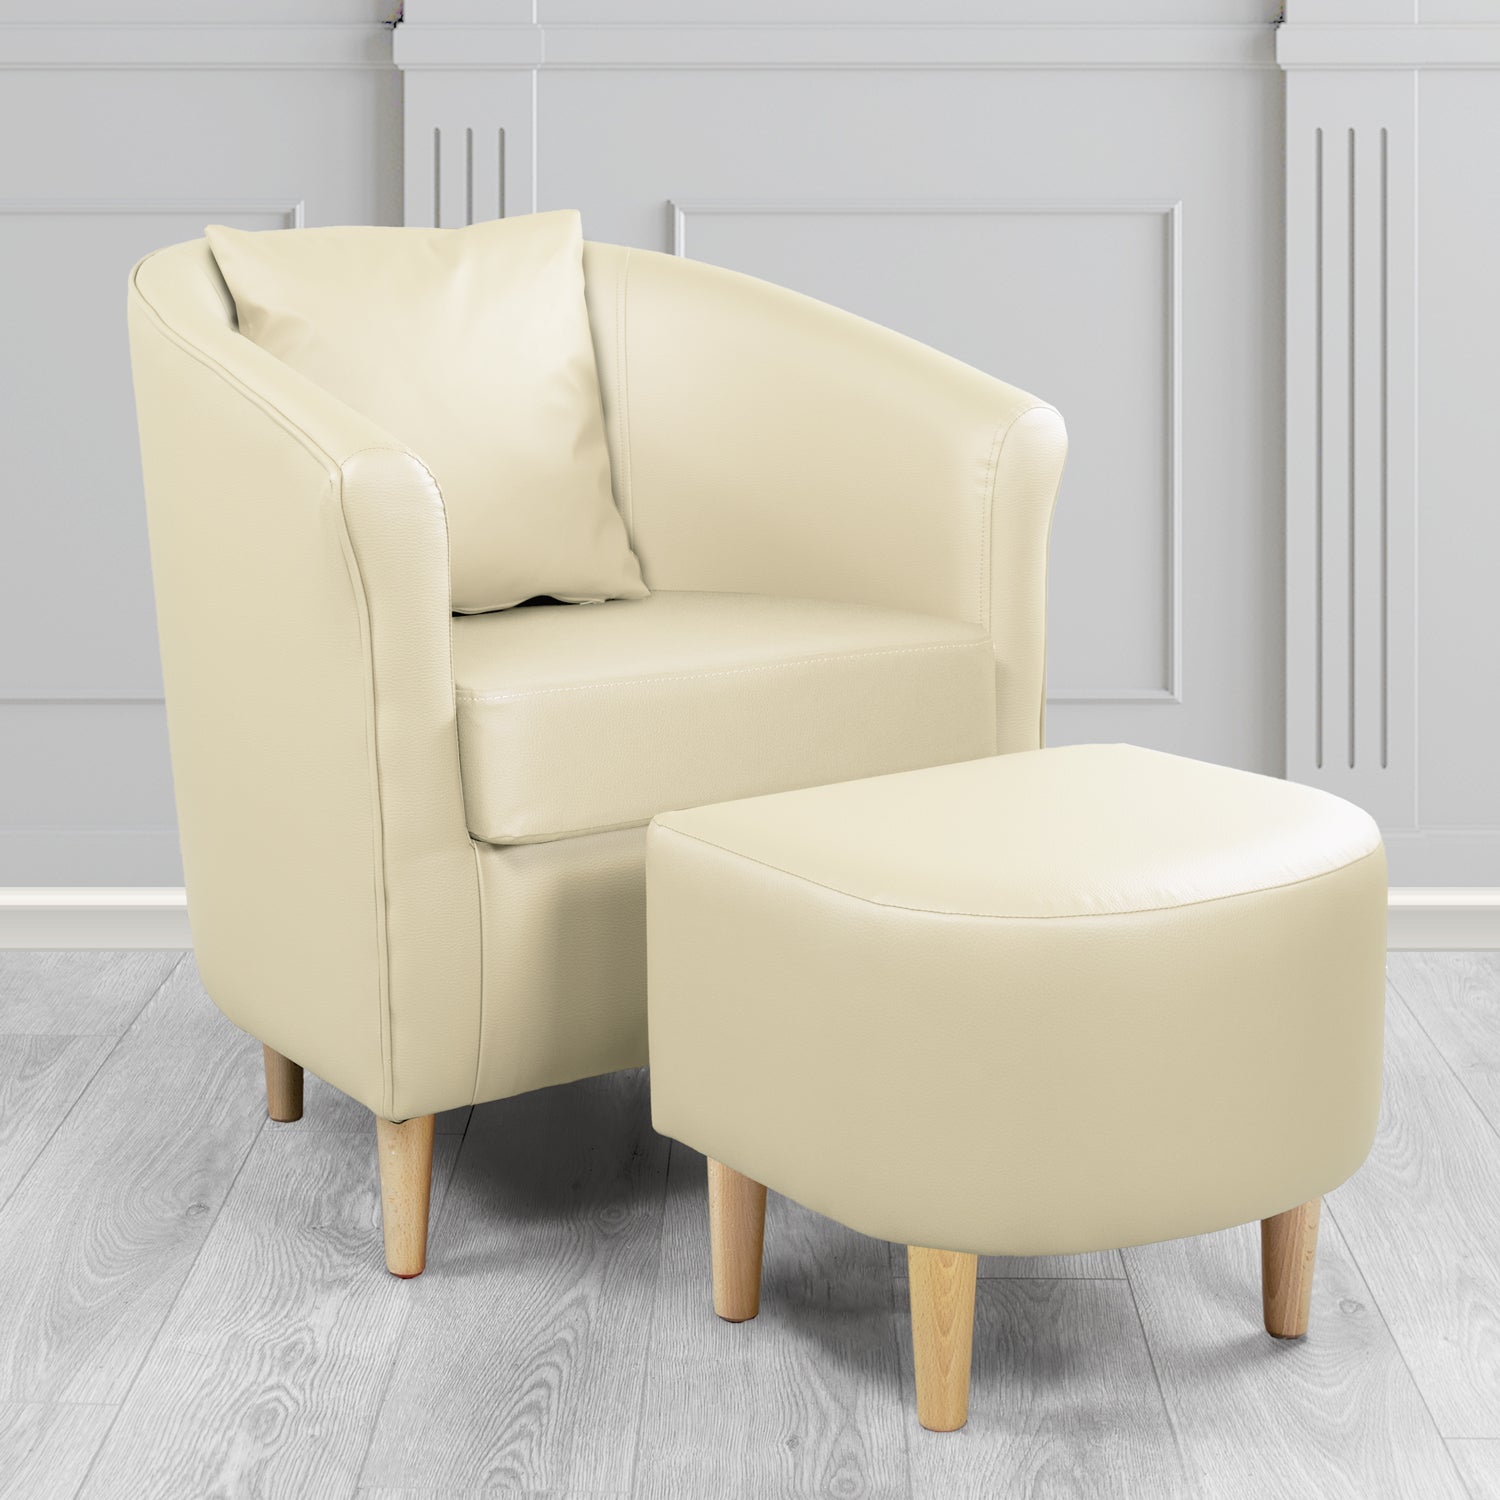 St Tropez Tub Chair with Footstool Set in Madrid Cream Faux Leather - The Tub Chair Shop